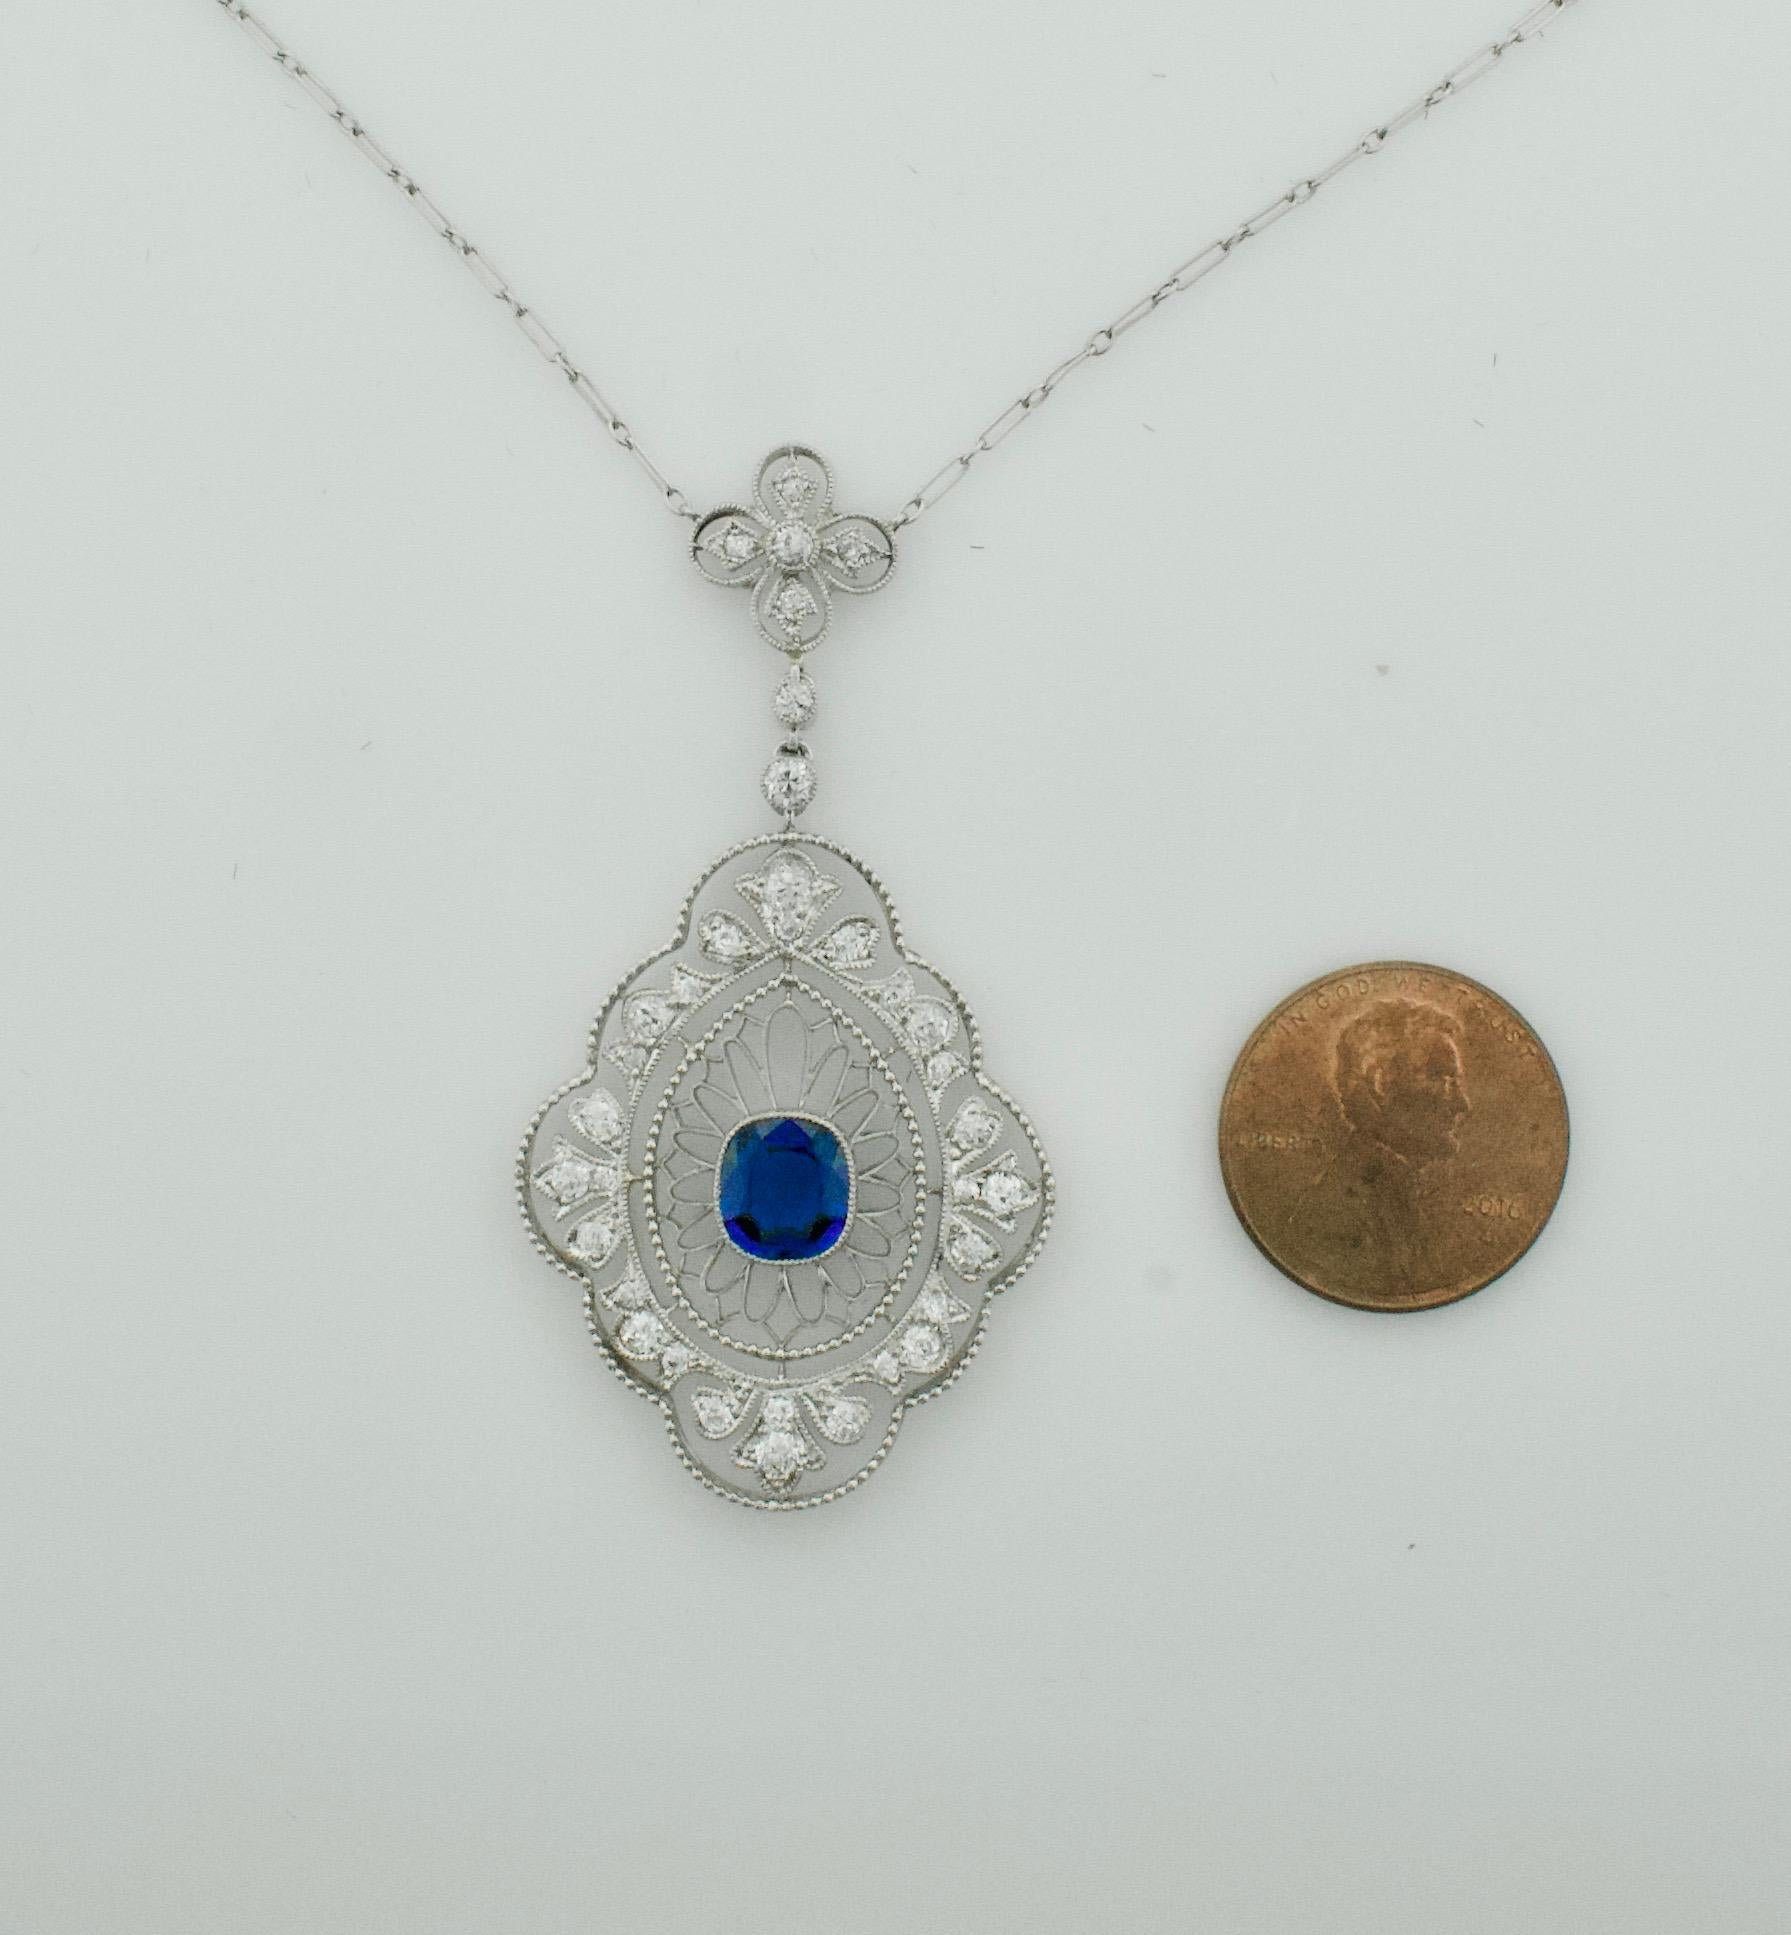 Edwardian Sapphire and Diamond Necklace in Platinum circa 1915
One Cushion Cut Sapphire Weighing 1.70 Carats Approximately [bright with no imperfections visible to the naked eye]
Thirty Three Old Mine Cut Diamonds Weighing 1.50 Carats Approximately